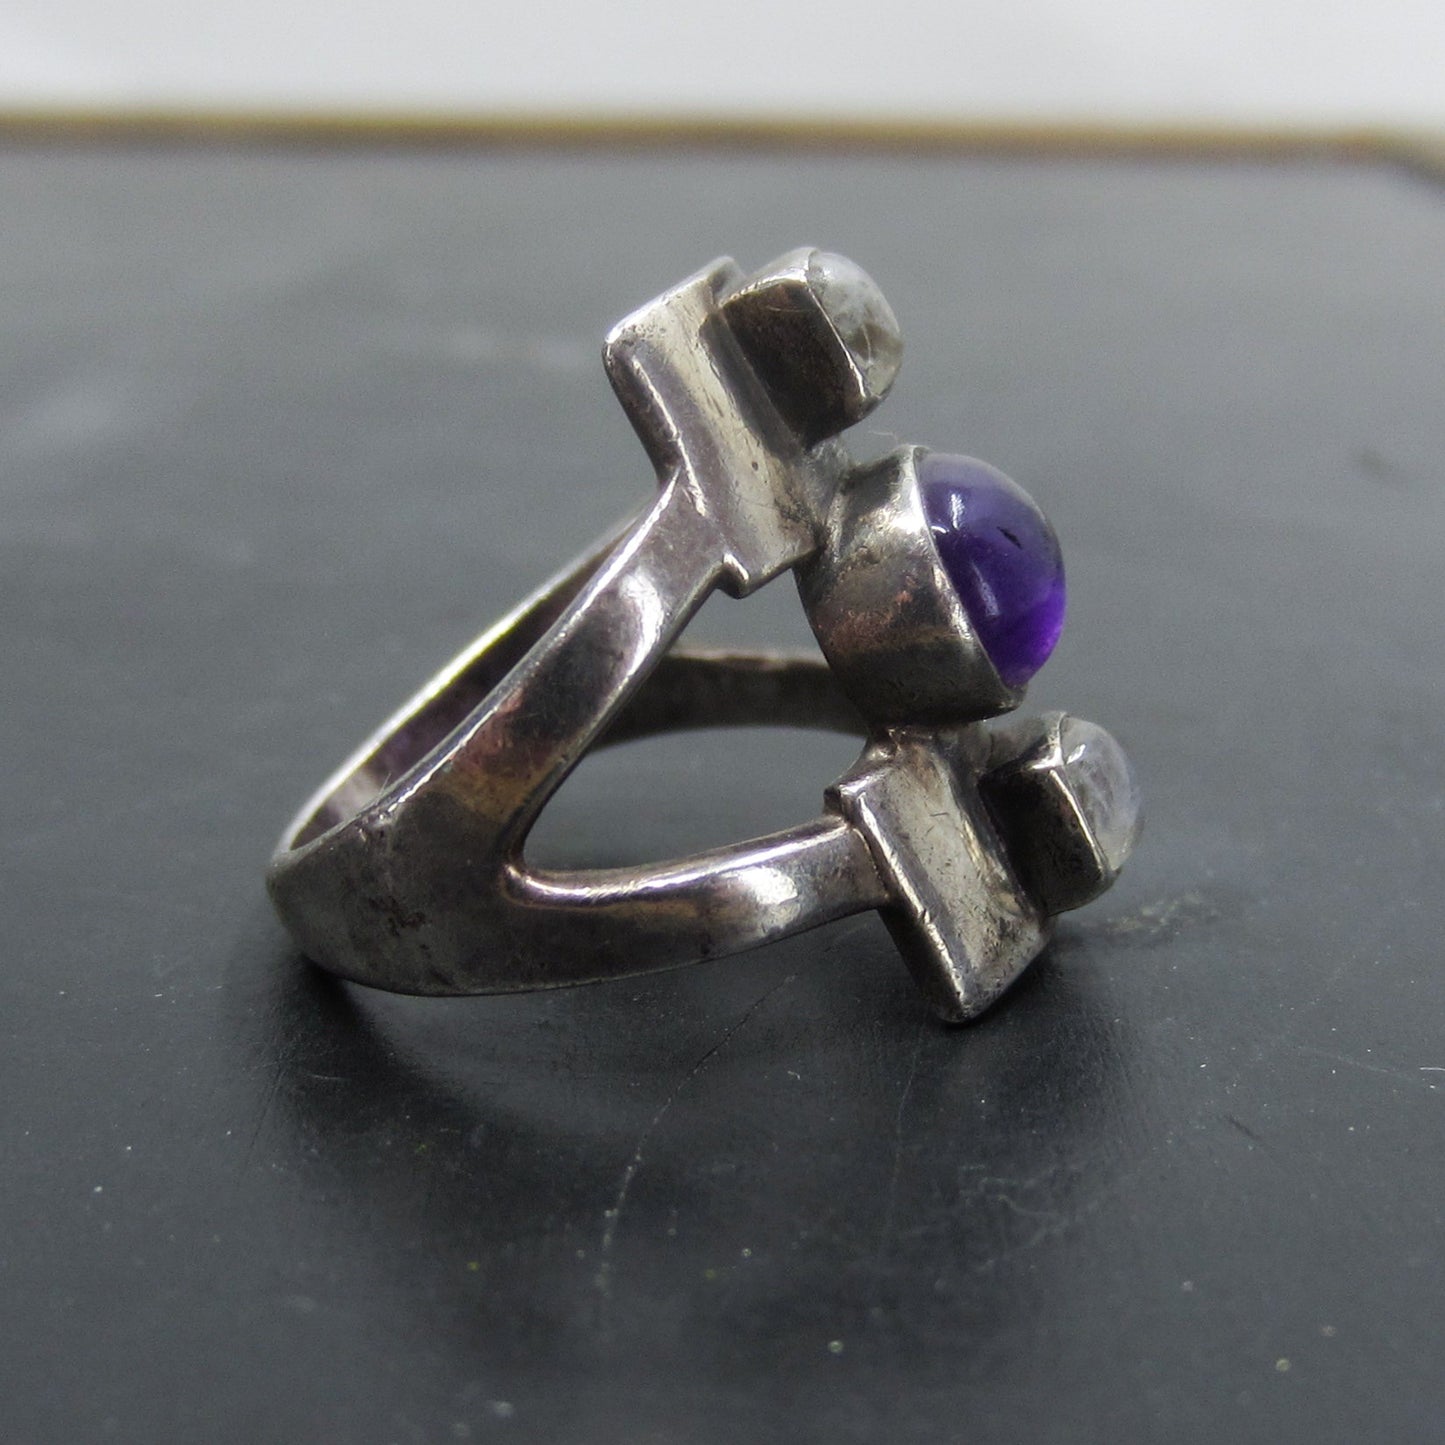 SOLD--Post-Modern Amethyst and Moonstone Ring Sterling c. 1990